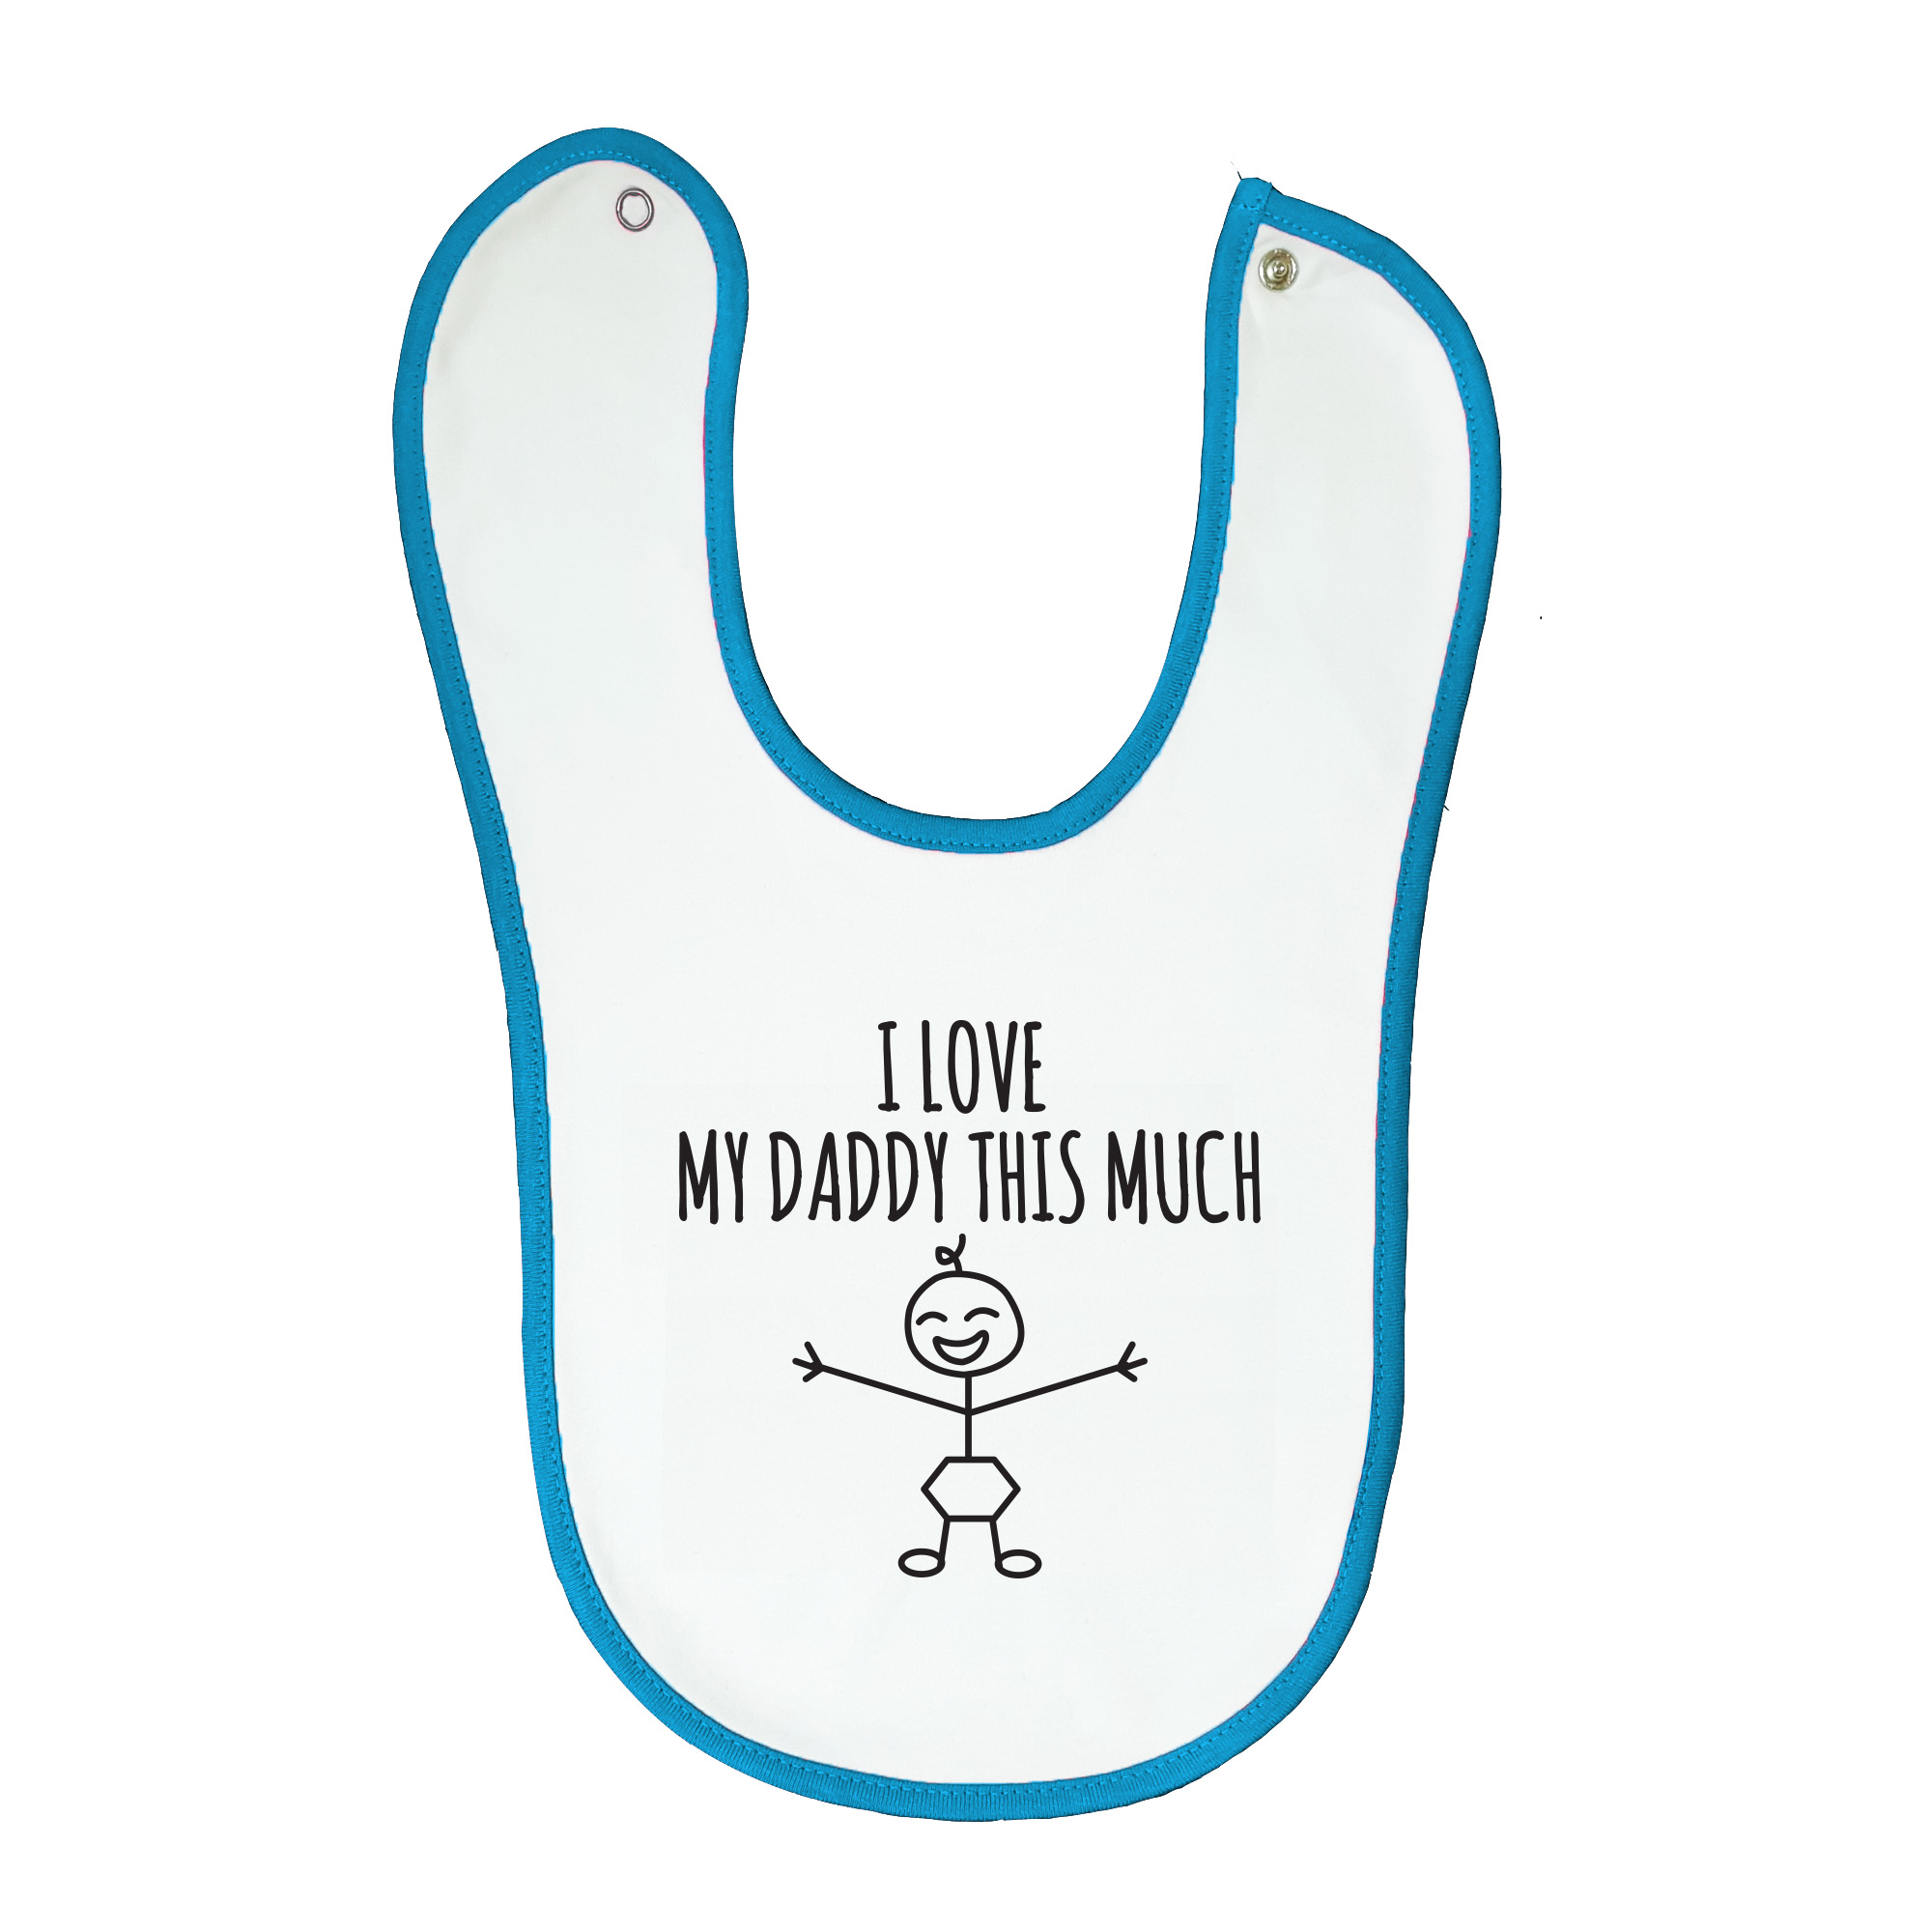 Soft baby bib, white with blue trim, 100% cotton machine washable. Age: 6-12 months. Print: I Heart My Daddy This Much.